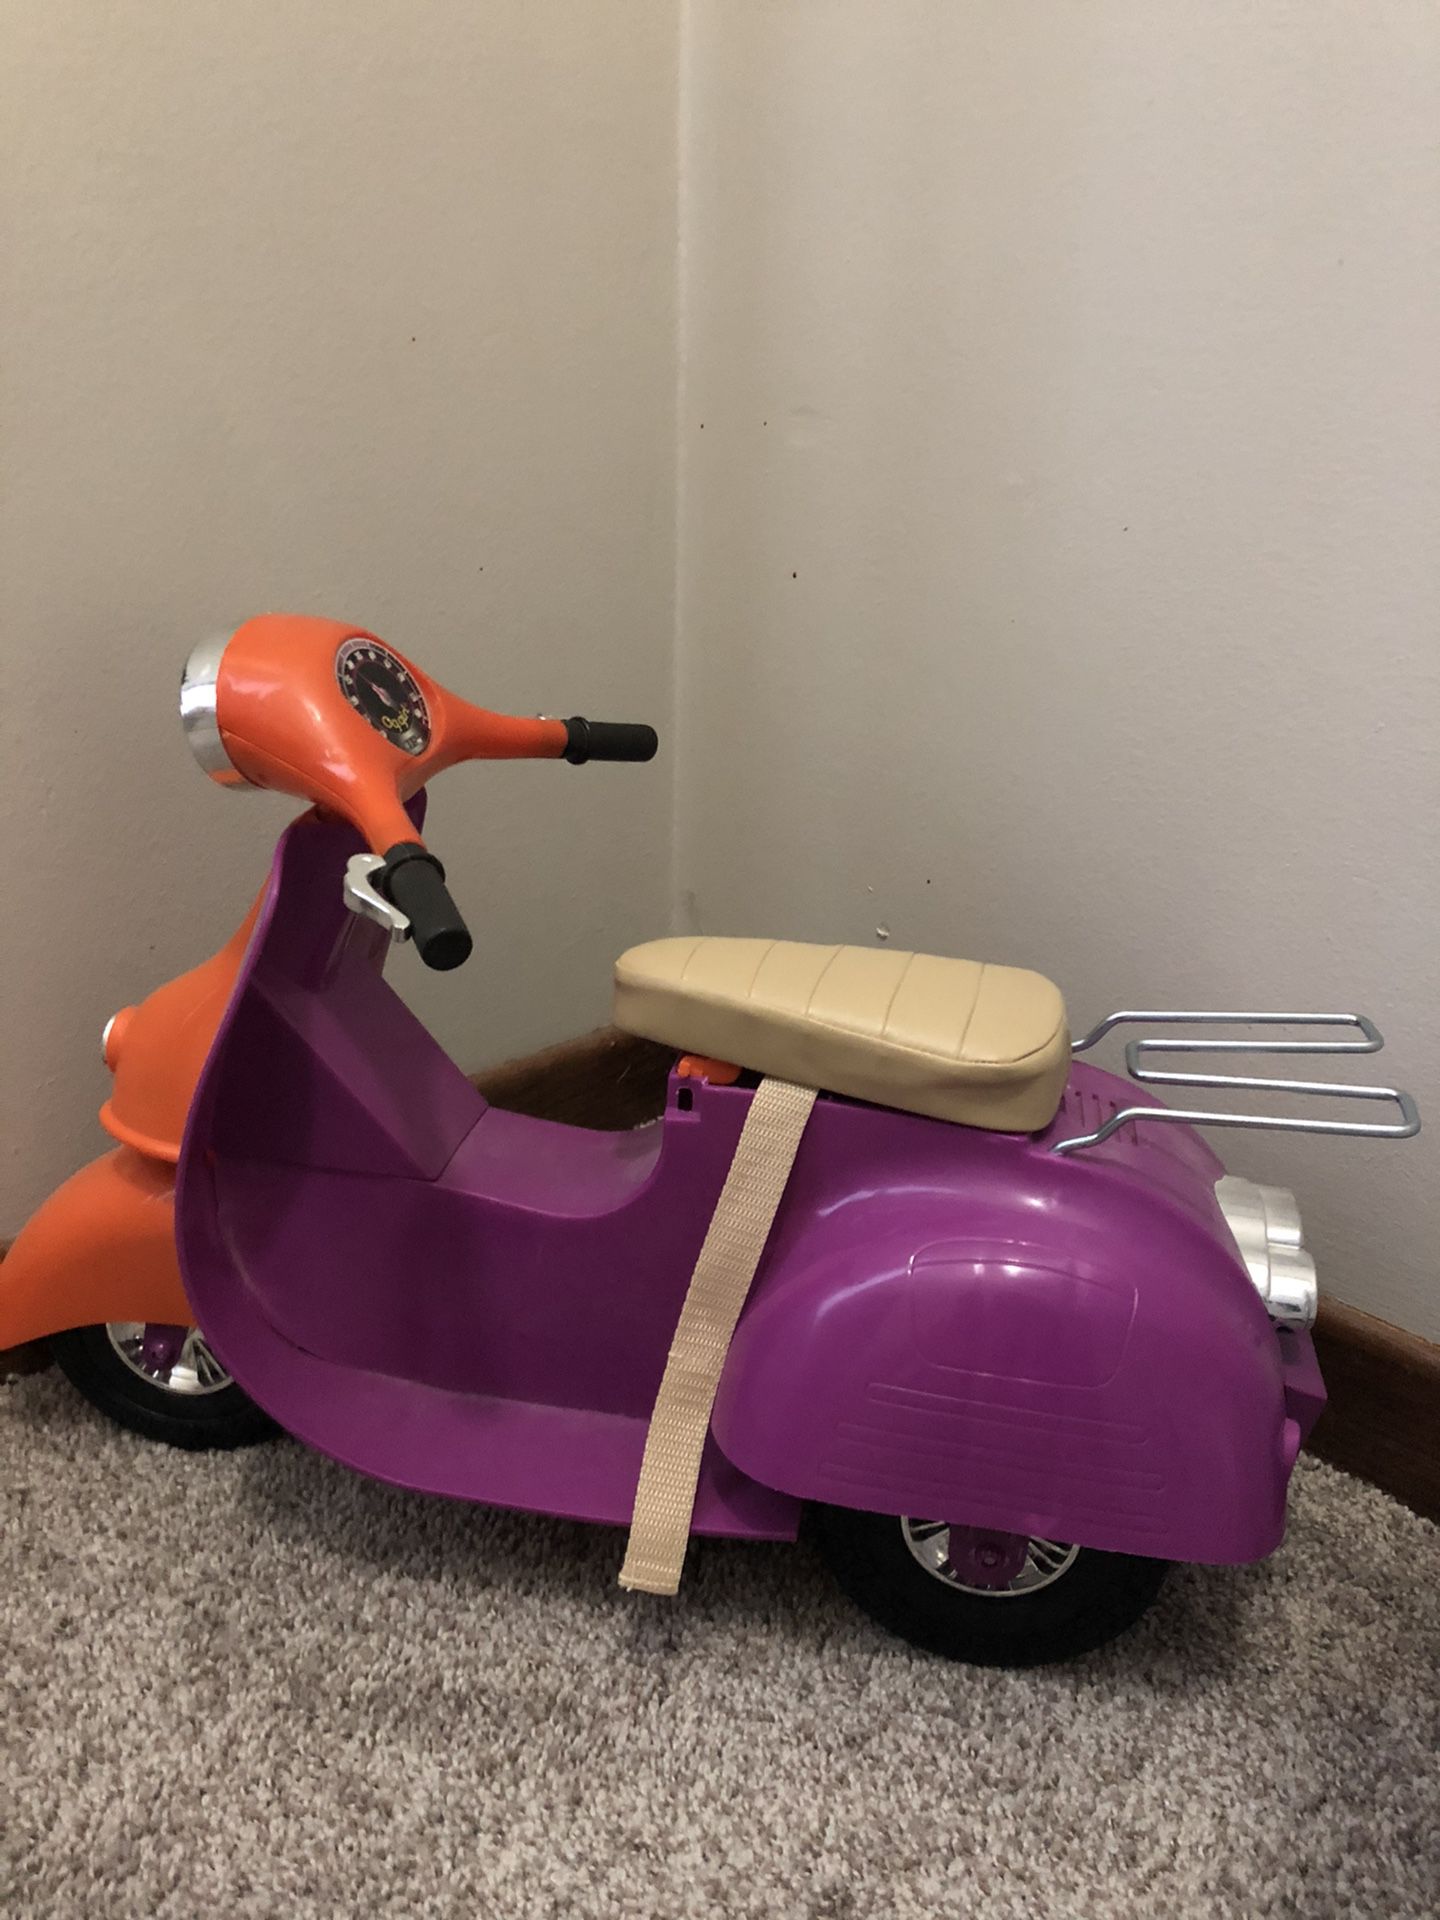 My Generation brand scooter for American girl type dolls.